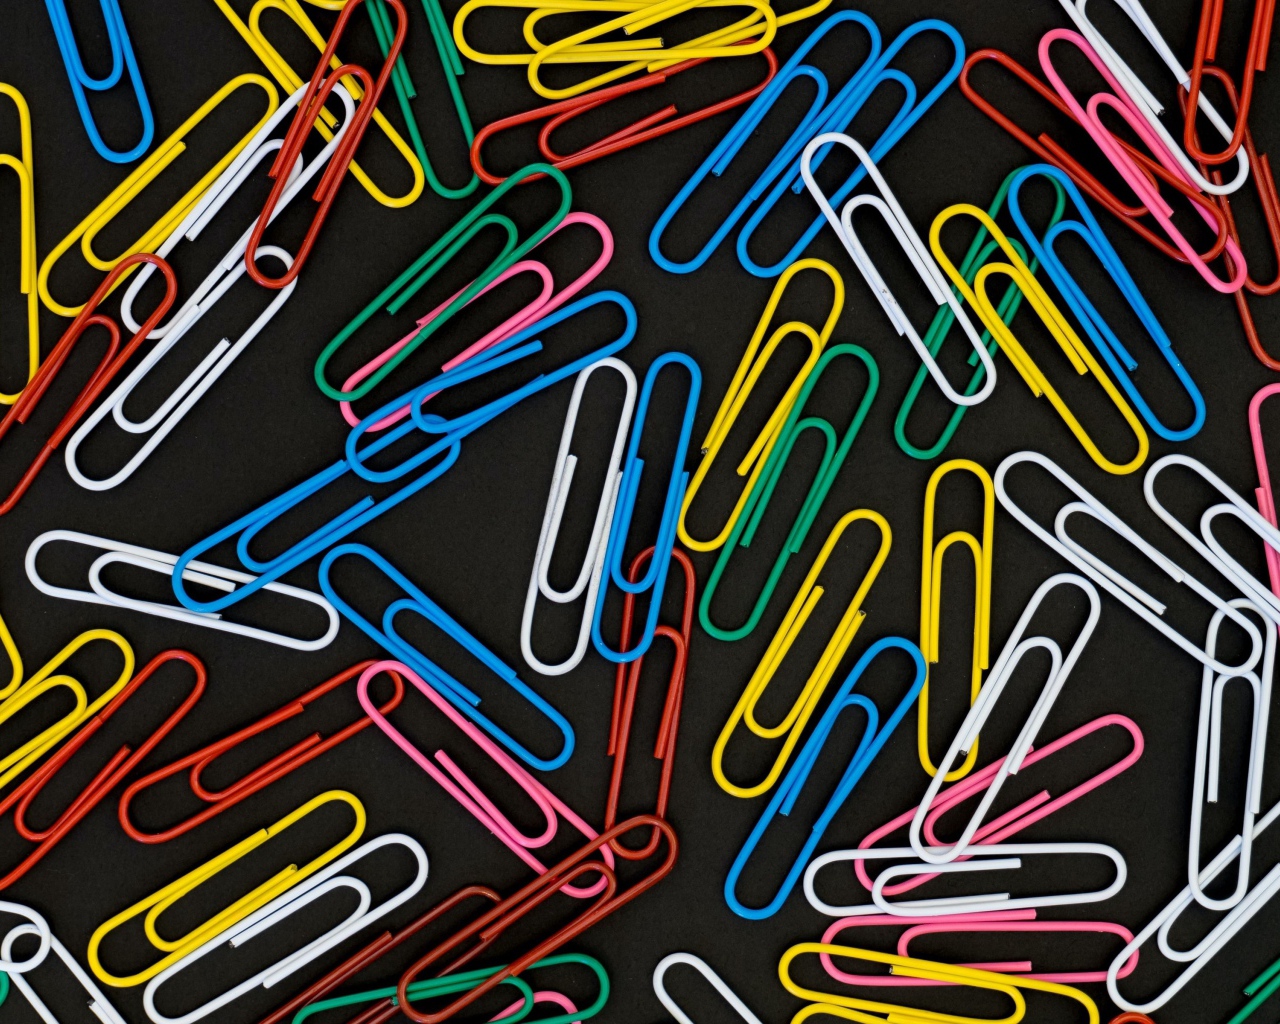 Many multi-colored paper clips on a black background